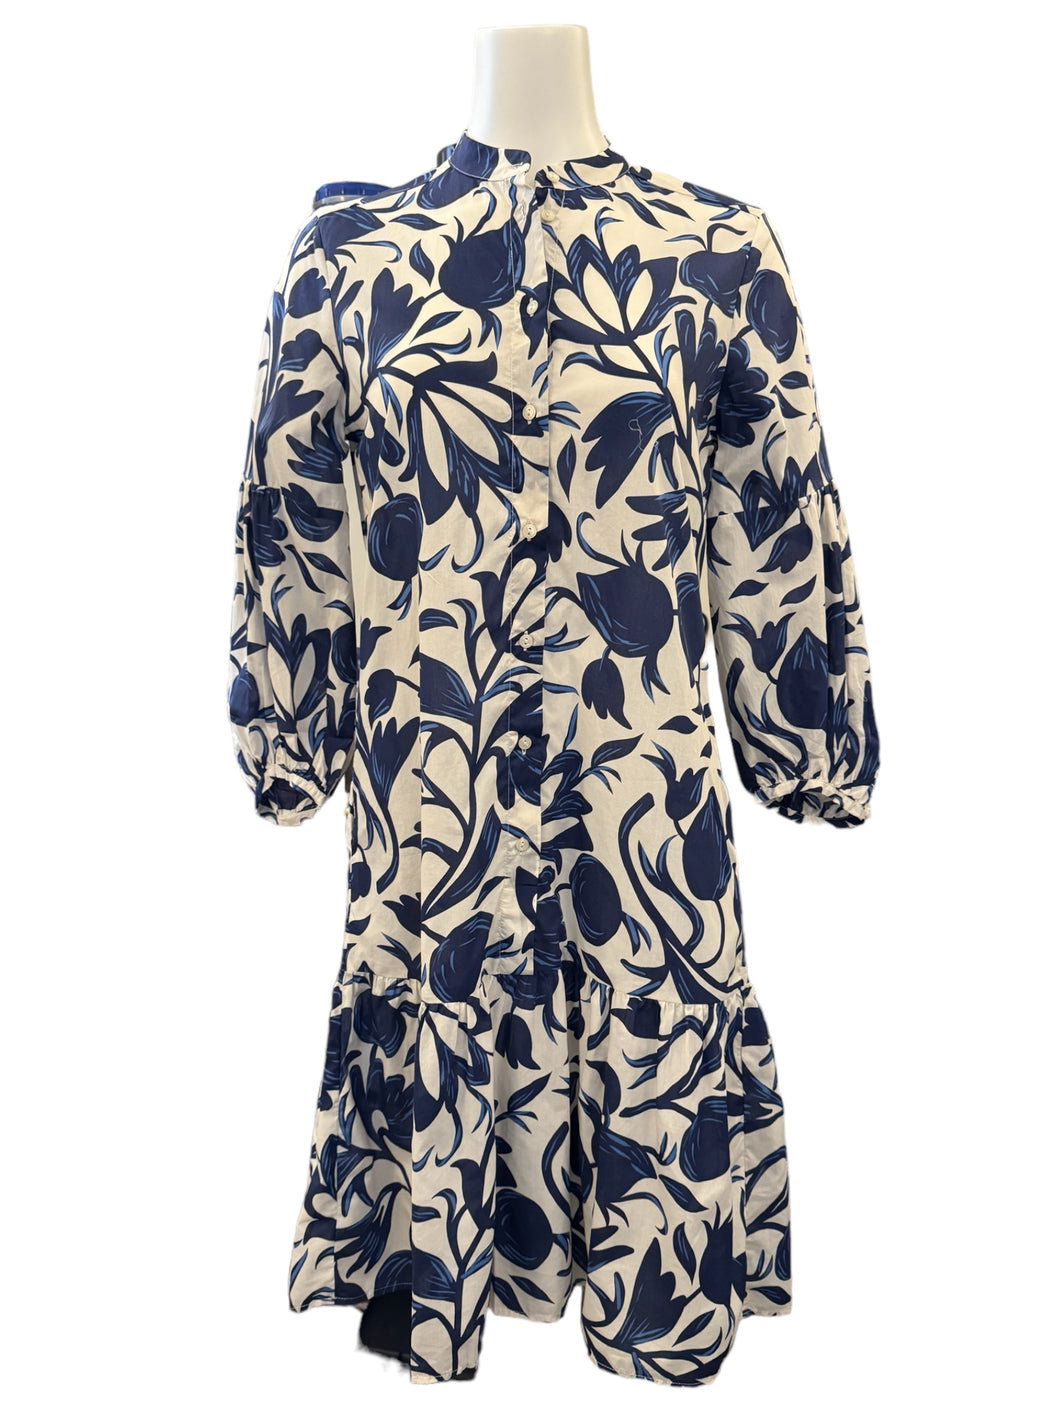 0039 Italy Mila Cotton Printed Navy Floral Dress